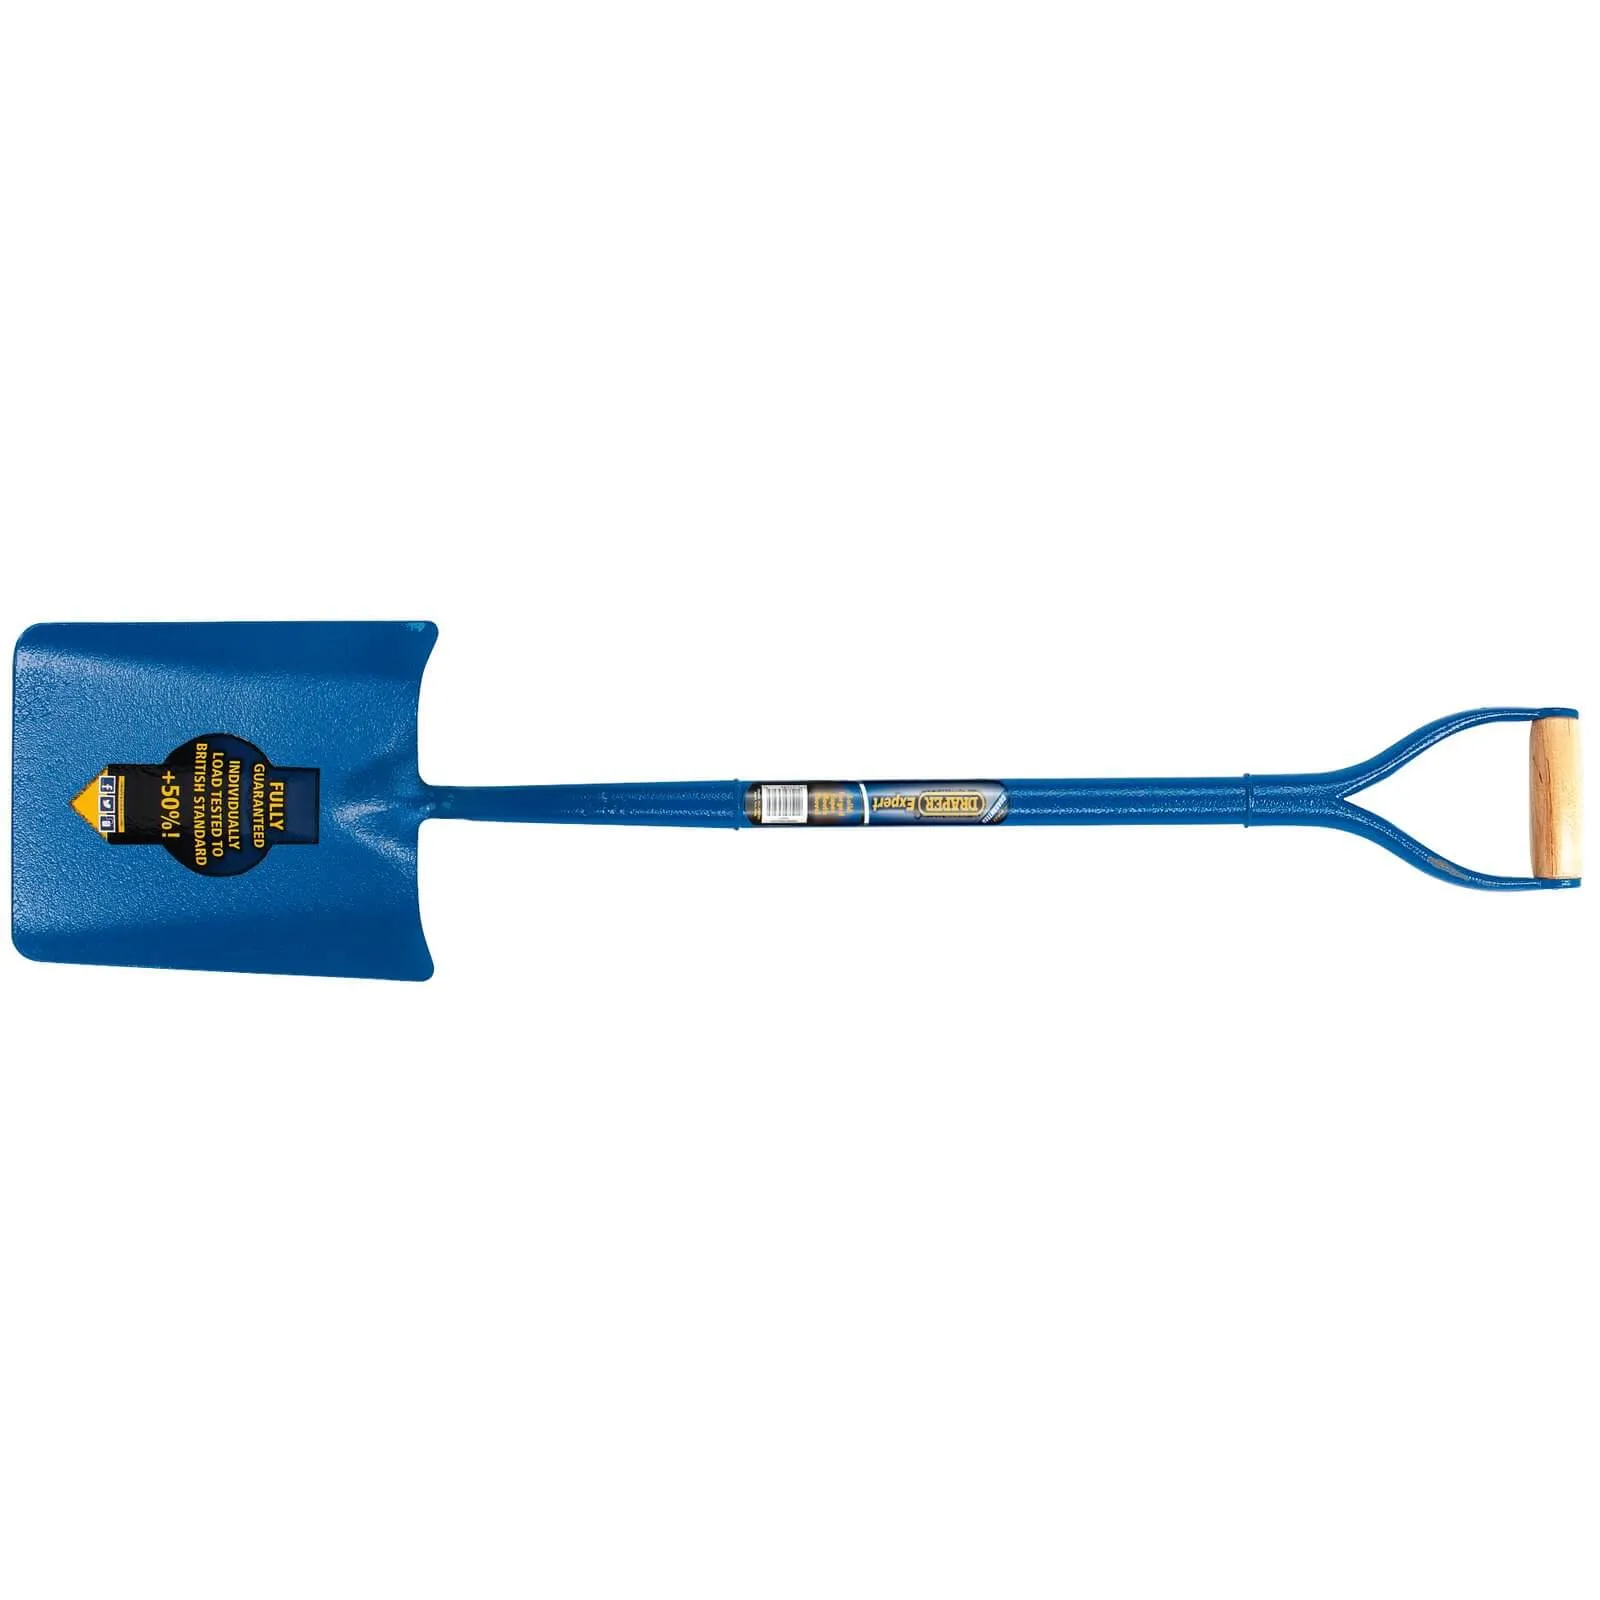 Draper Solid Forged Contractors Taper Mouth Shovel